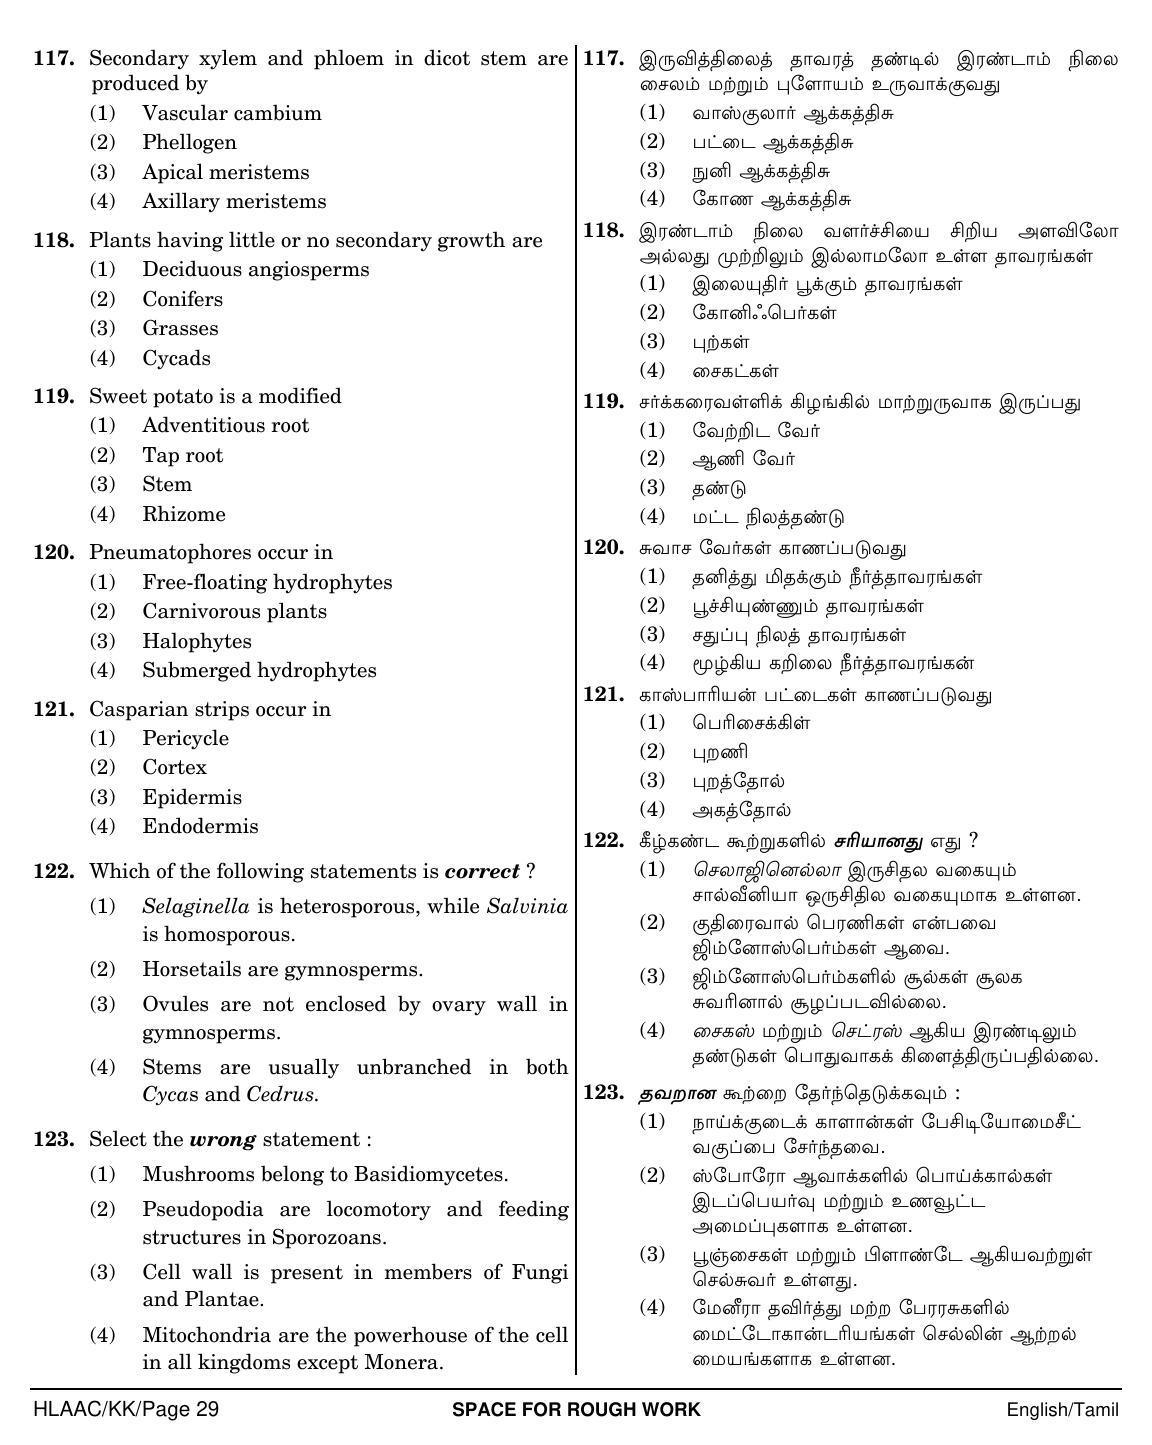 NEET Tamil KK 2018 Question Paper - Page 29